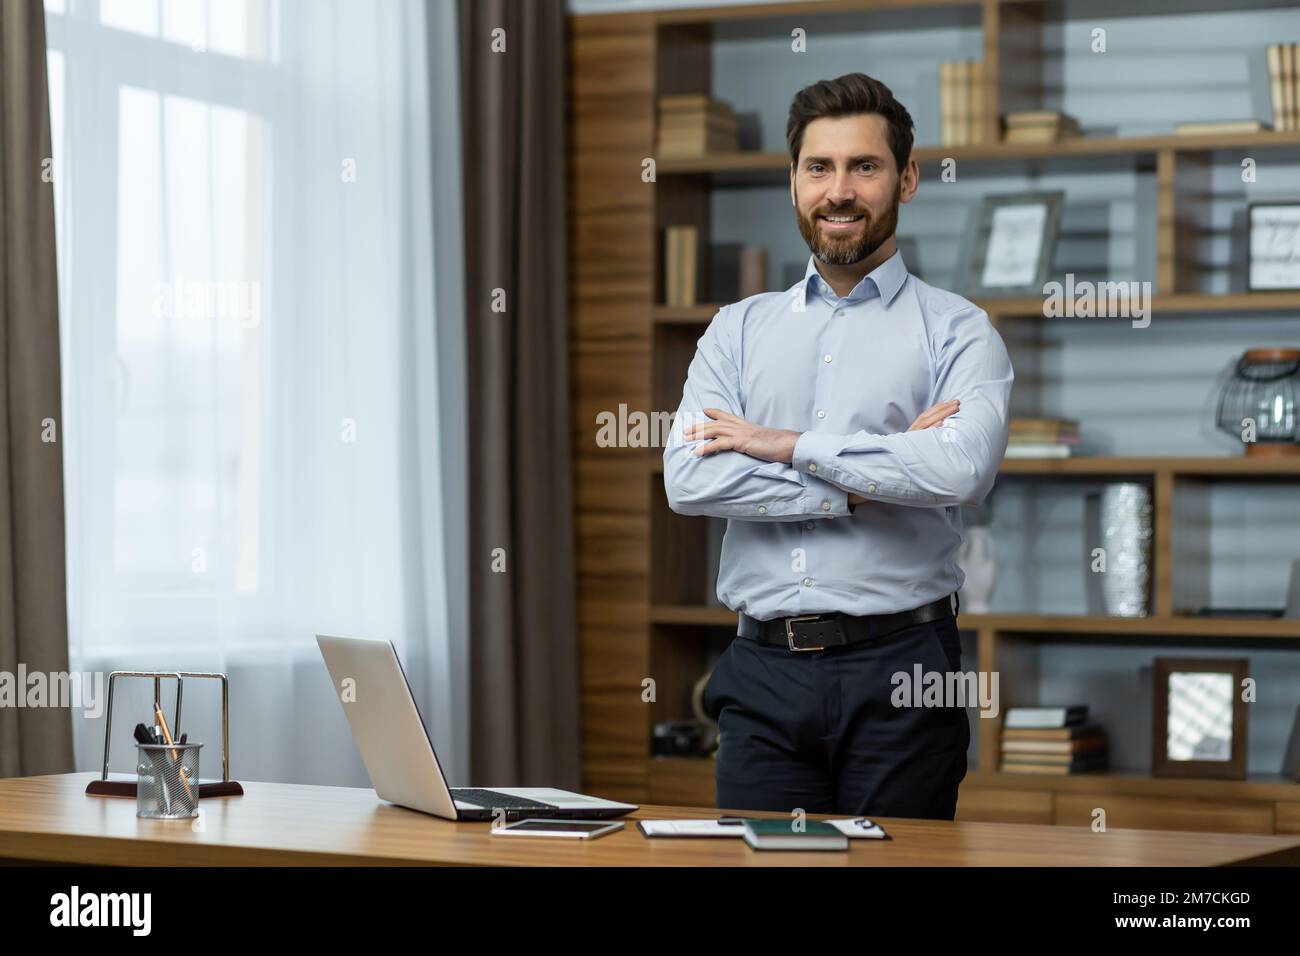 Portrait of successful businessman in office, man in shirt smiling and looking at camera, mature boss with beard with shaggy hands standing at workplace inside building. Stock Photo